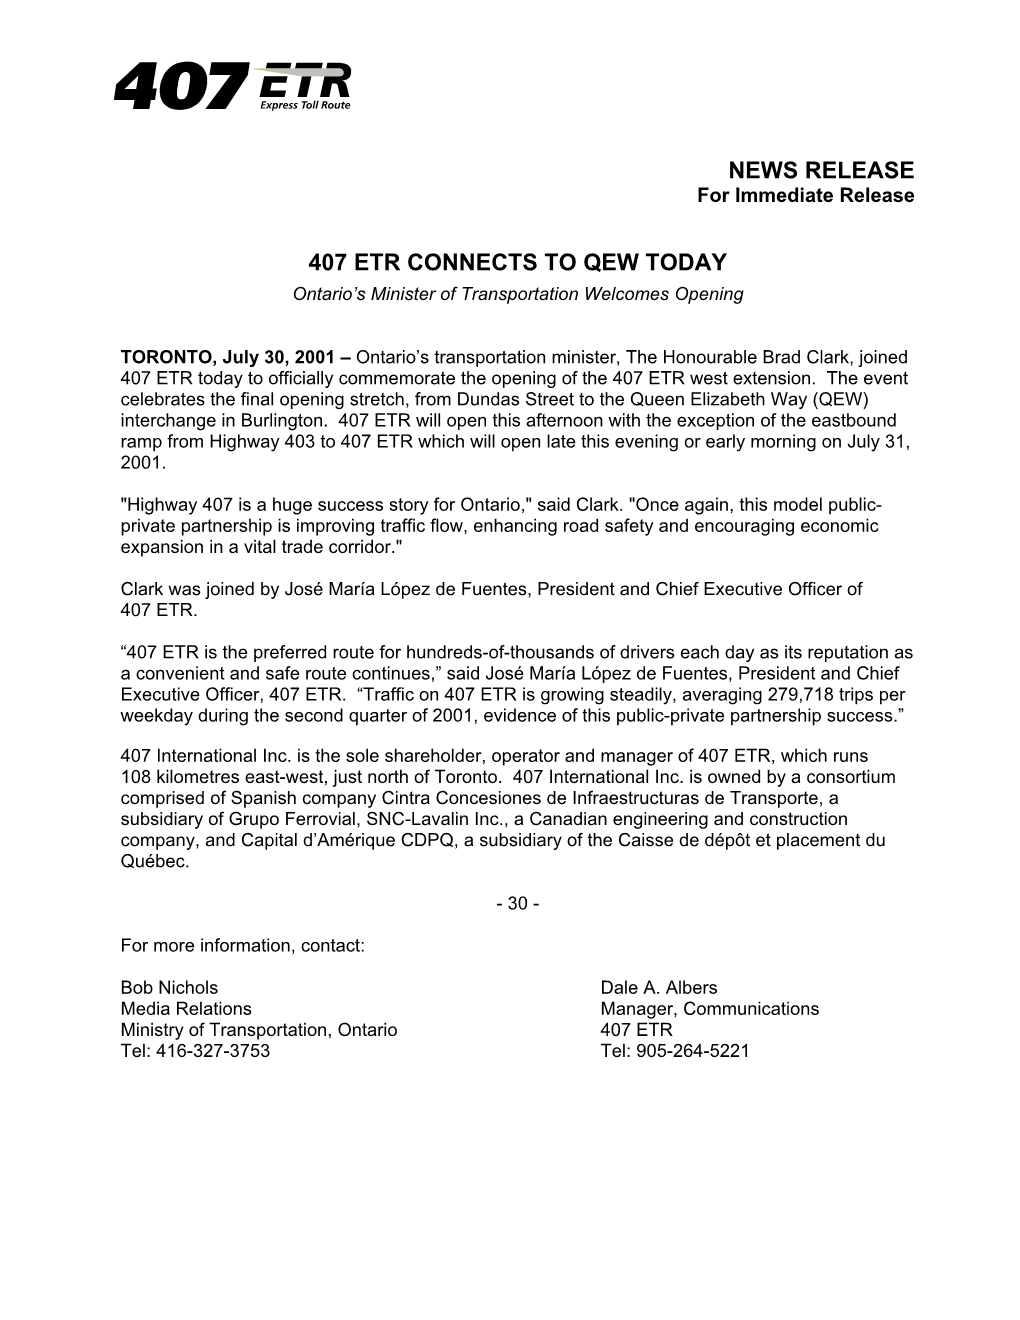 News Release 407 Etr Connects to Qew Today